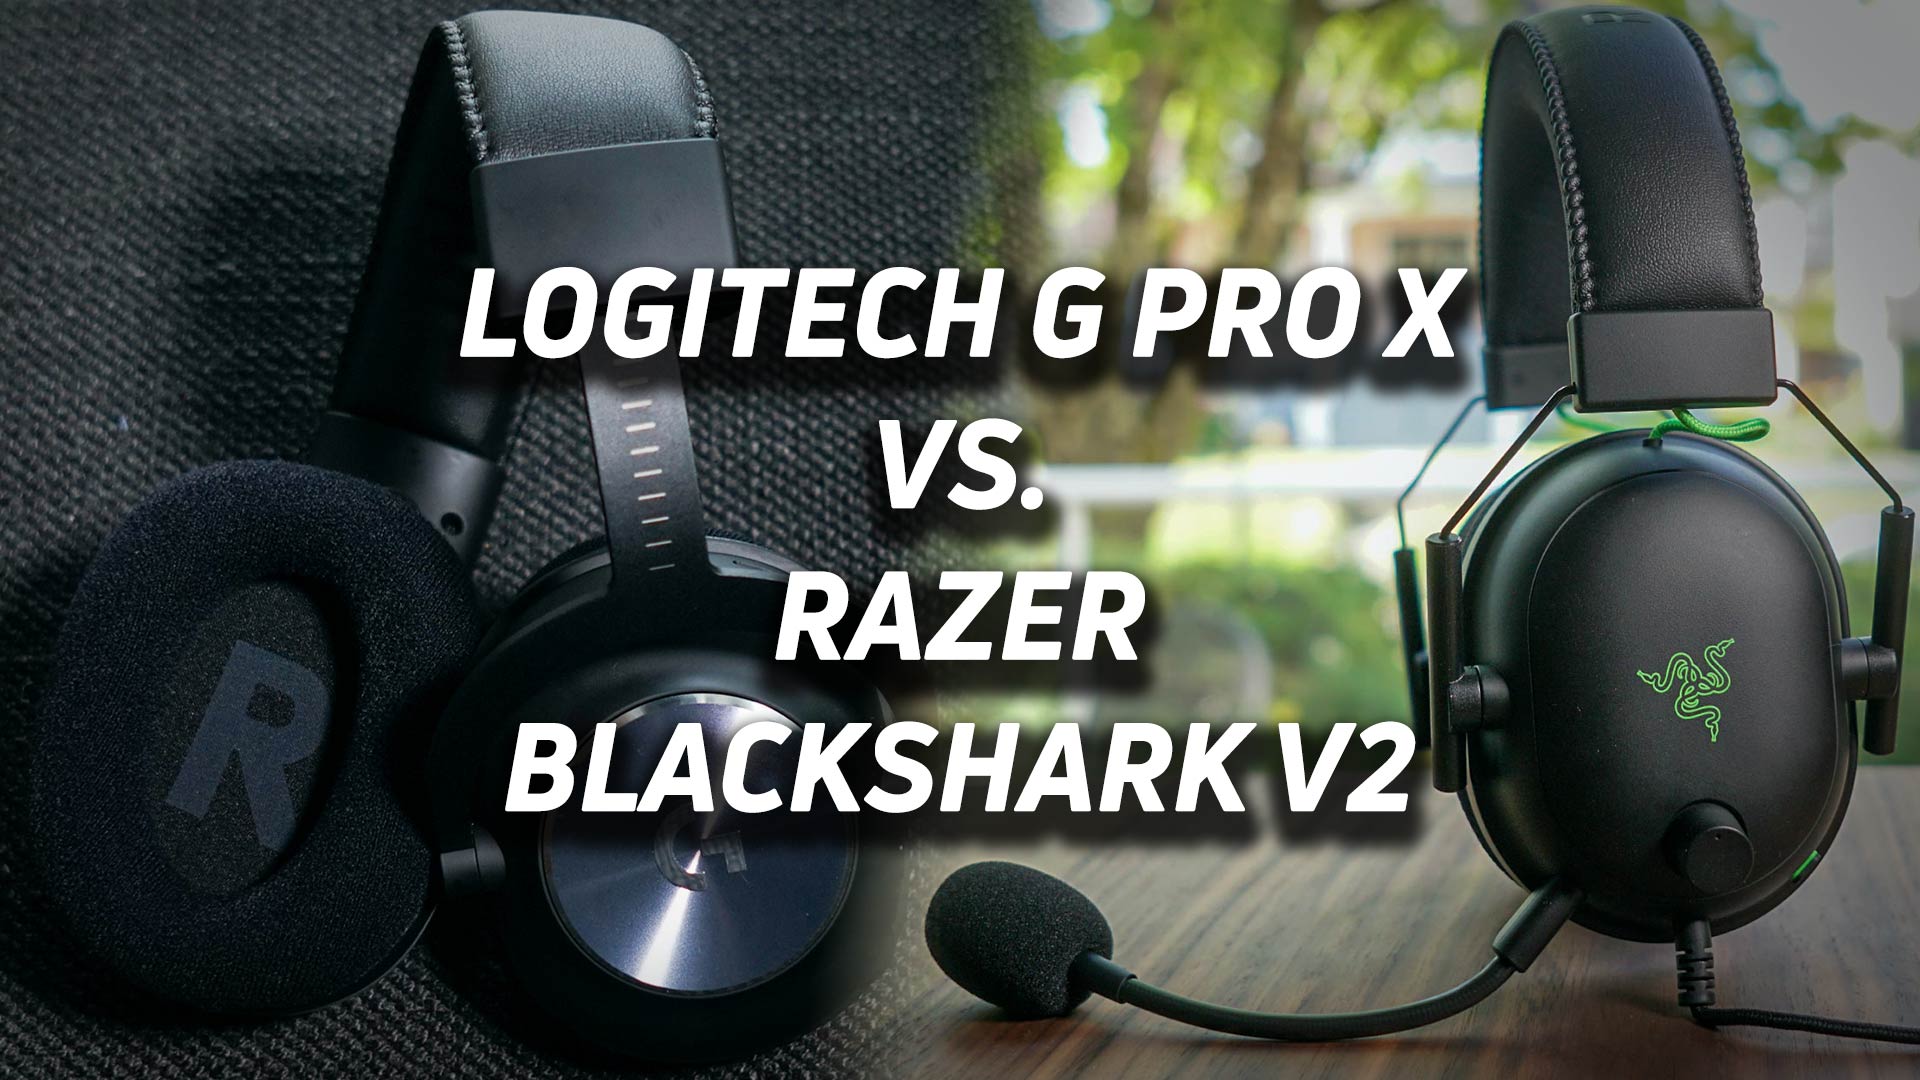 The Razer BlackShark V2 and Logitech G Pro X gaming headsets as a blended image with the appropriate versus text overlaid.